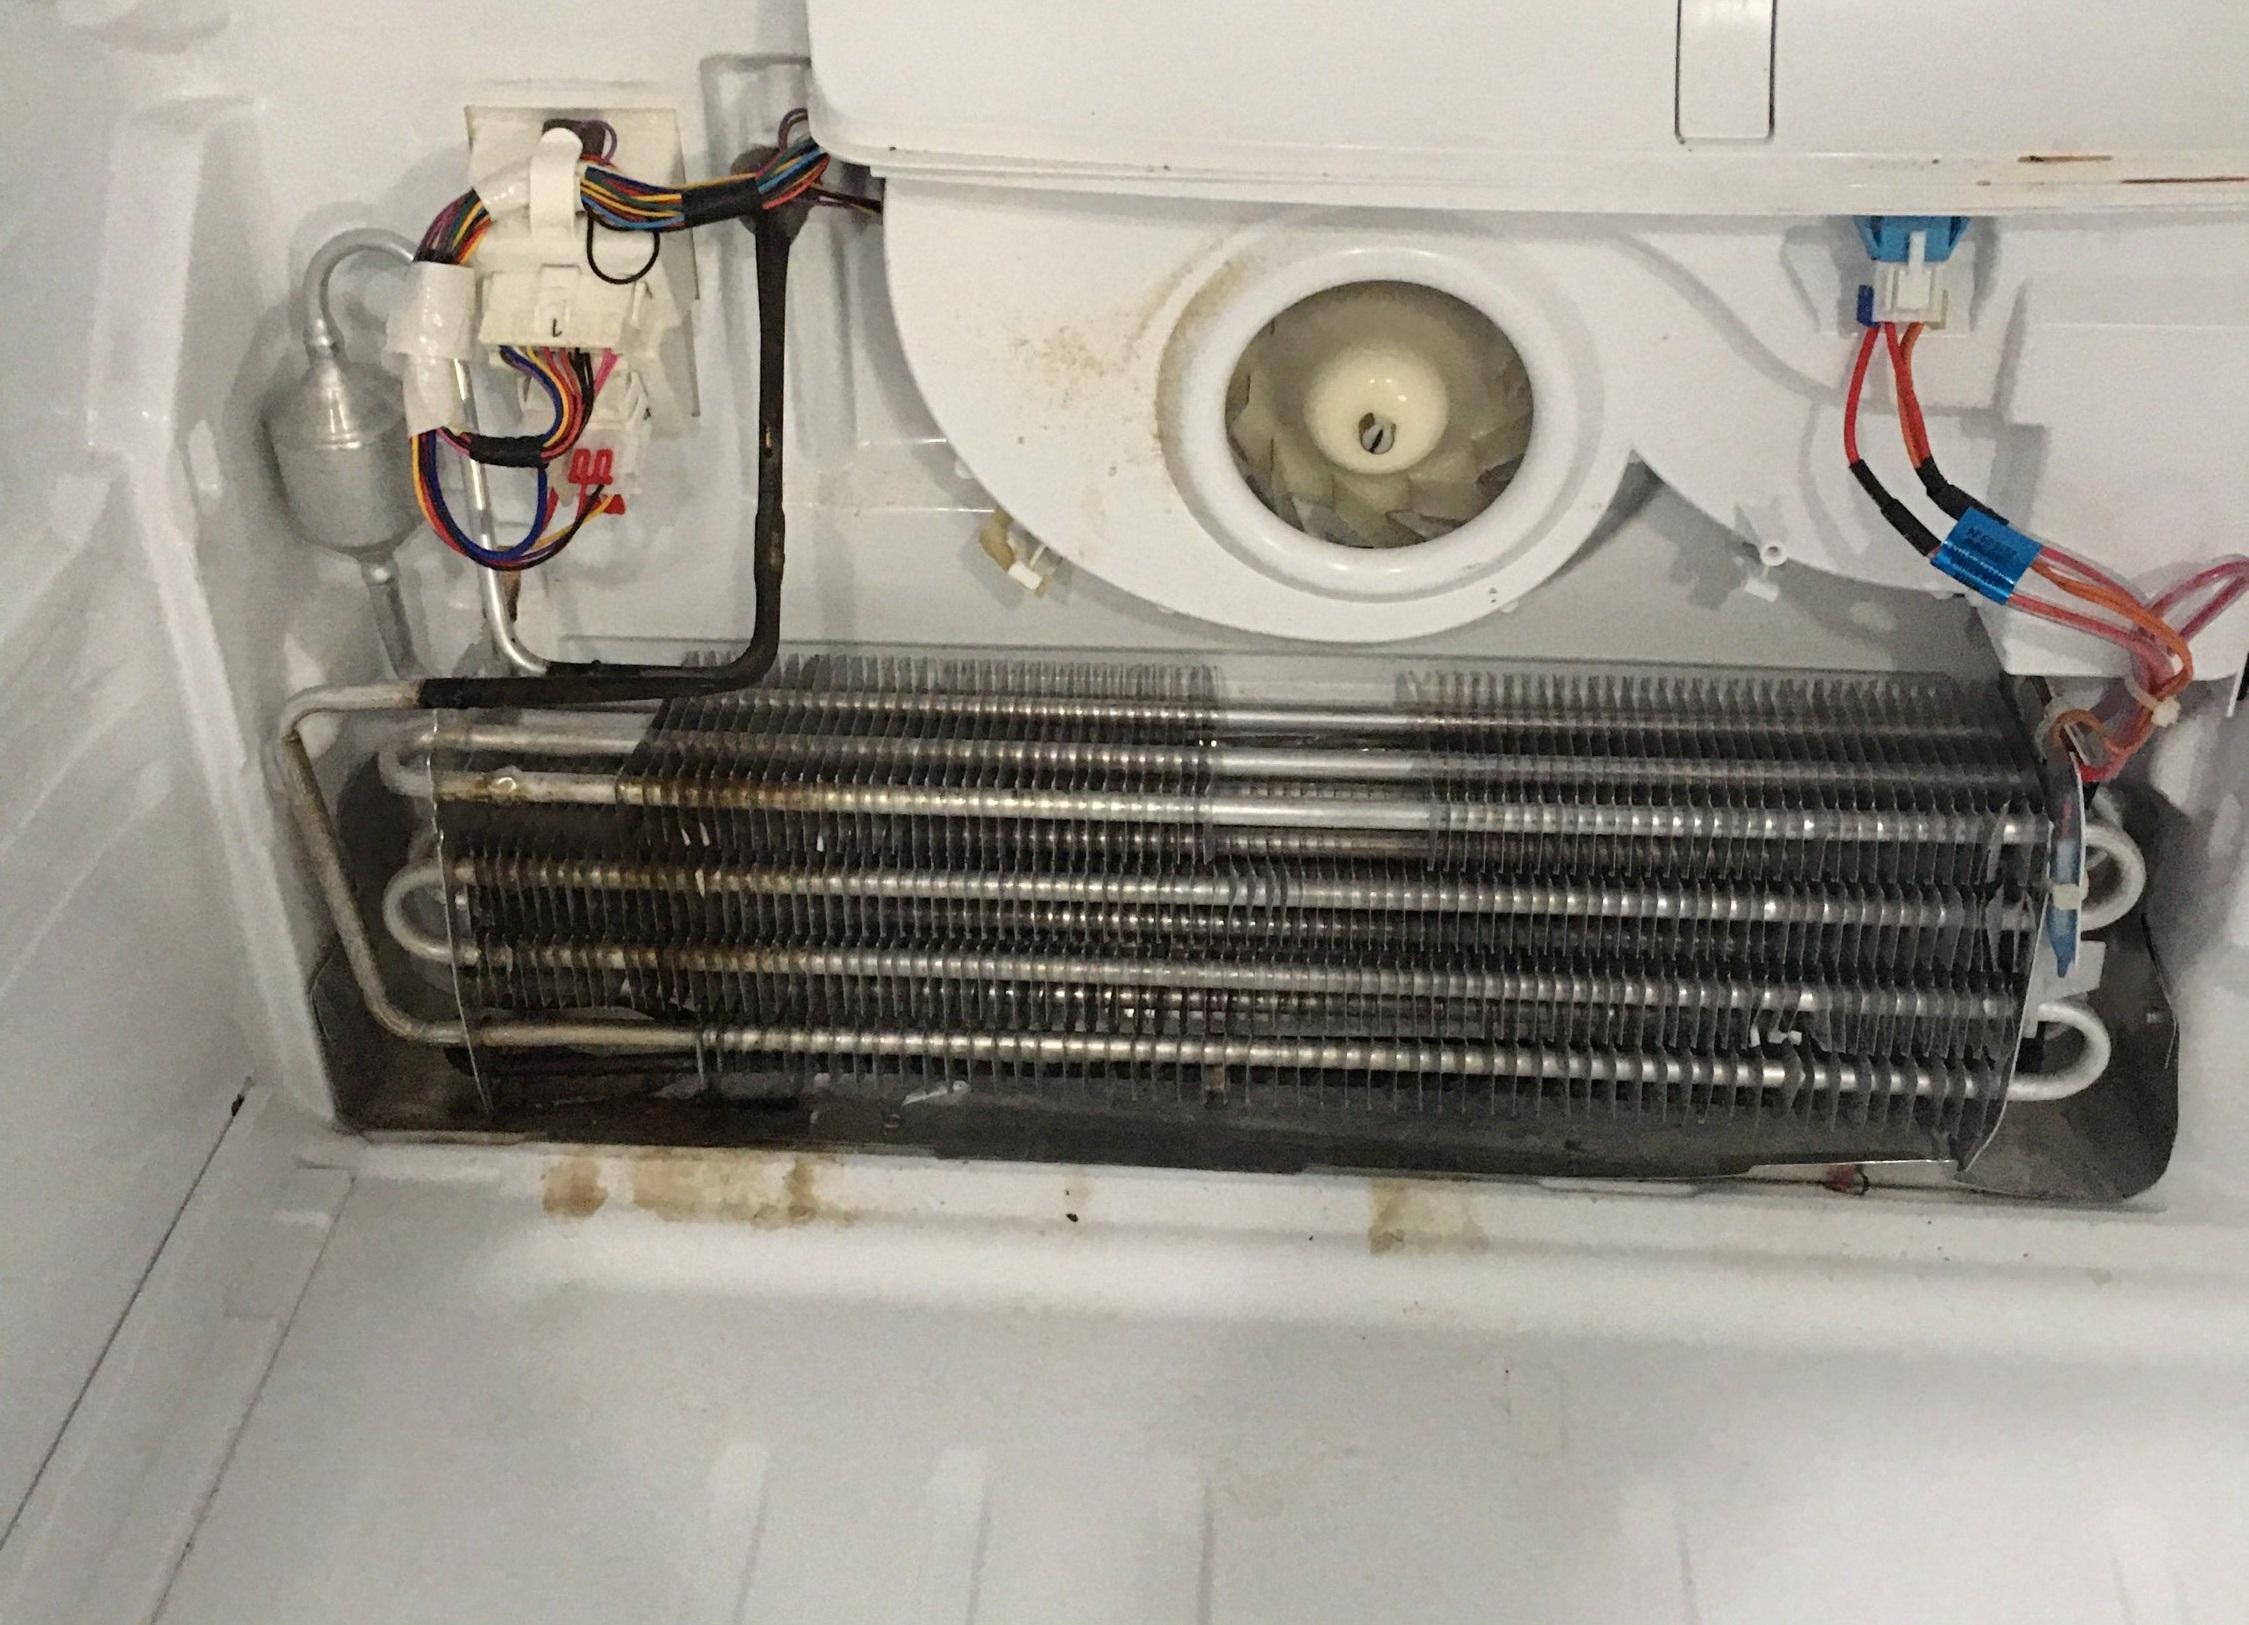 LG LMXC23746S Fridge not cooling - Page 2 - DIY Appliance Repair Help ...